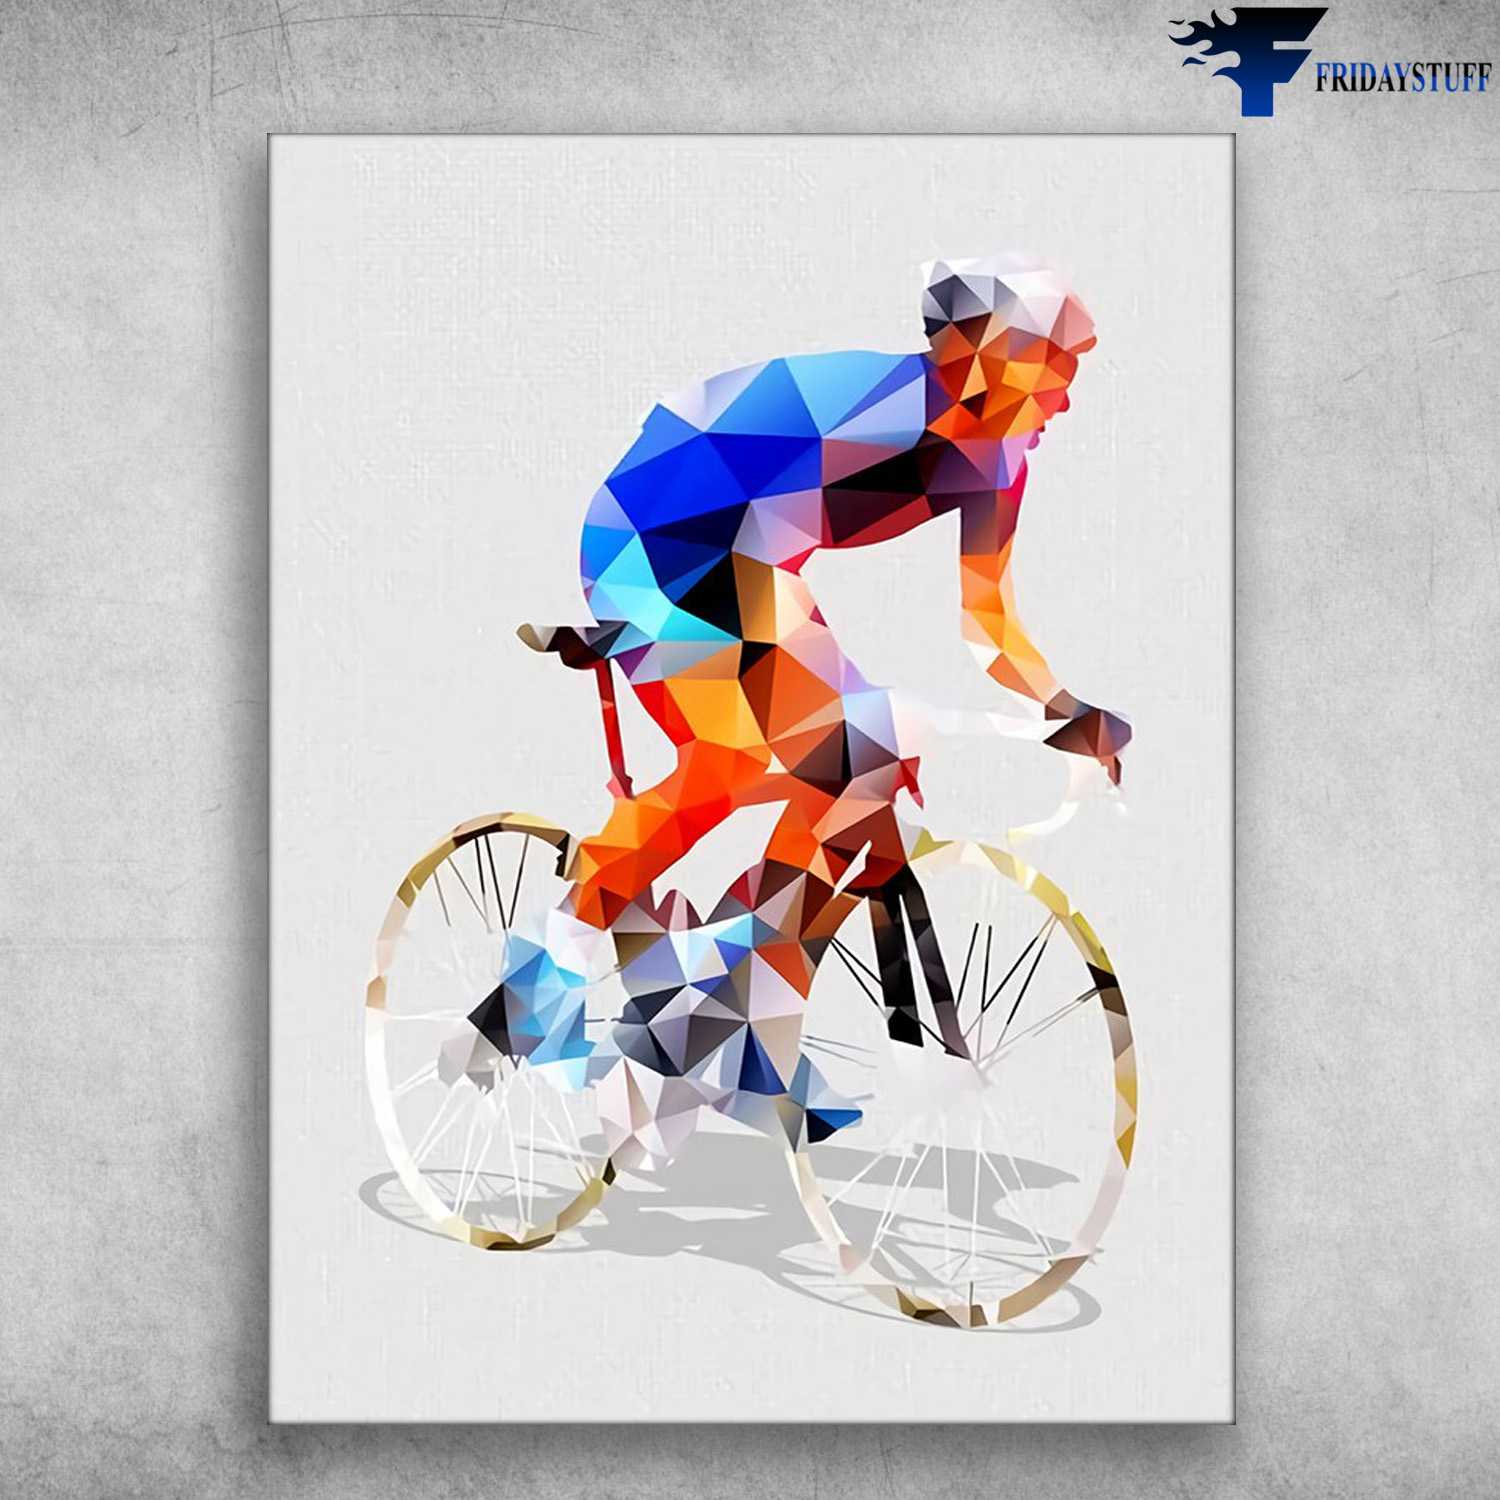 Cycling Man, Bicycle Lover, Biker Poster, Cycling Race